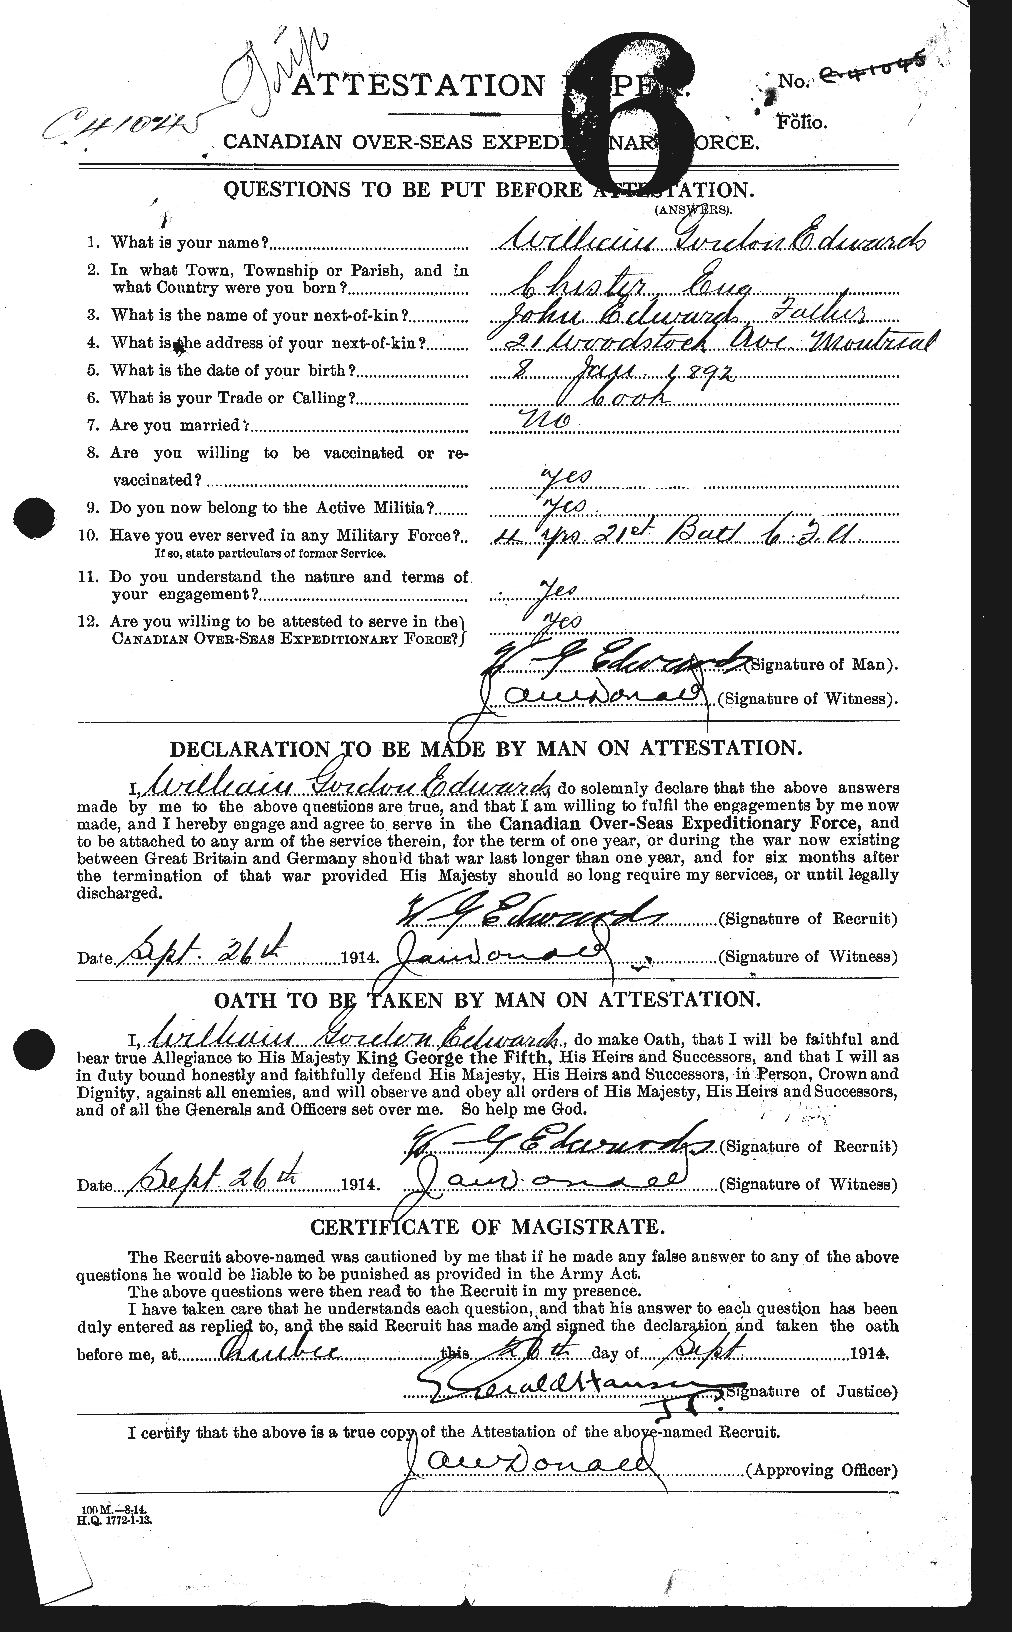 Personnel Records of the First World War - CEF 310426a